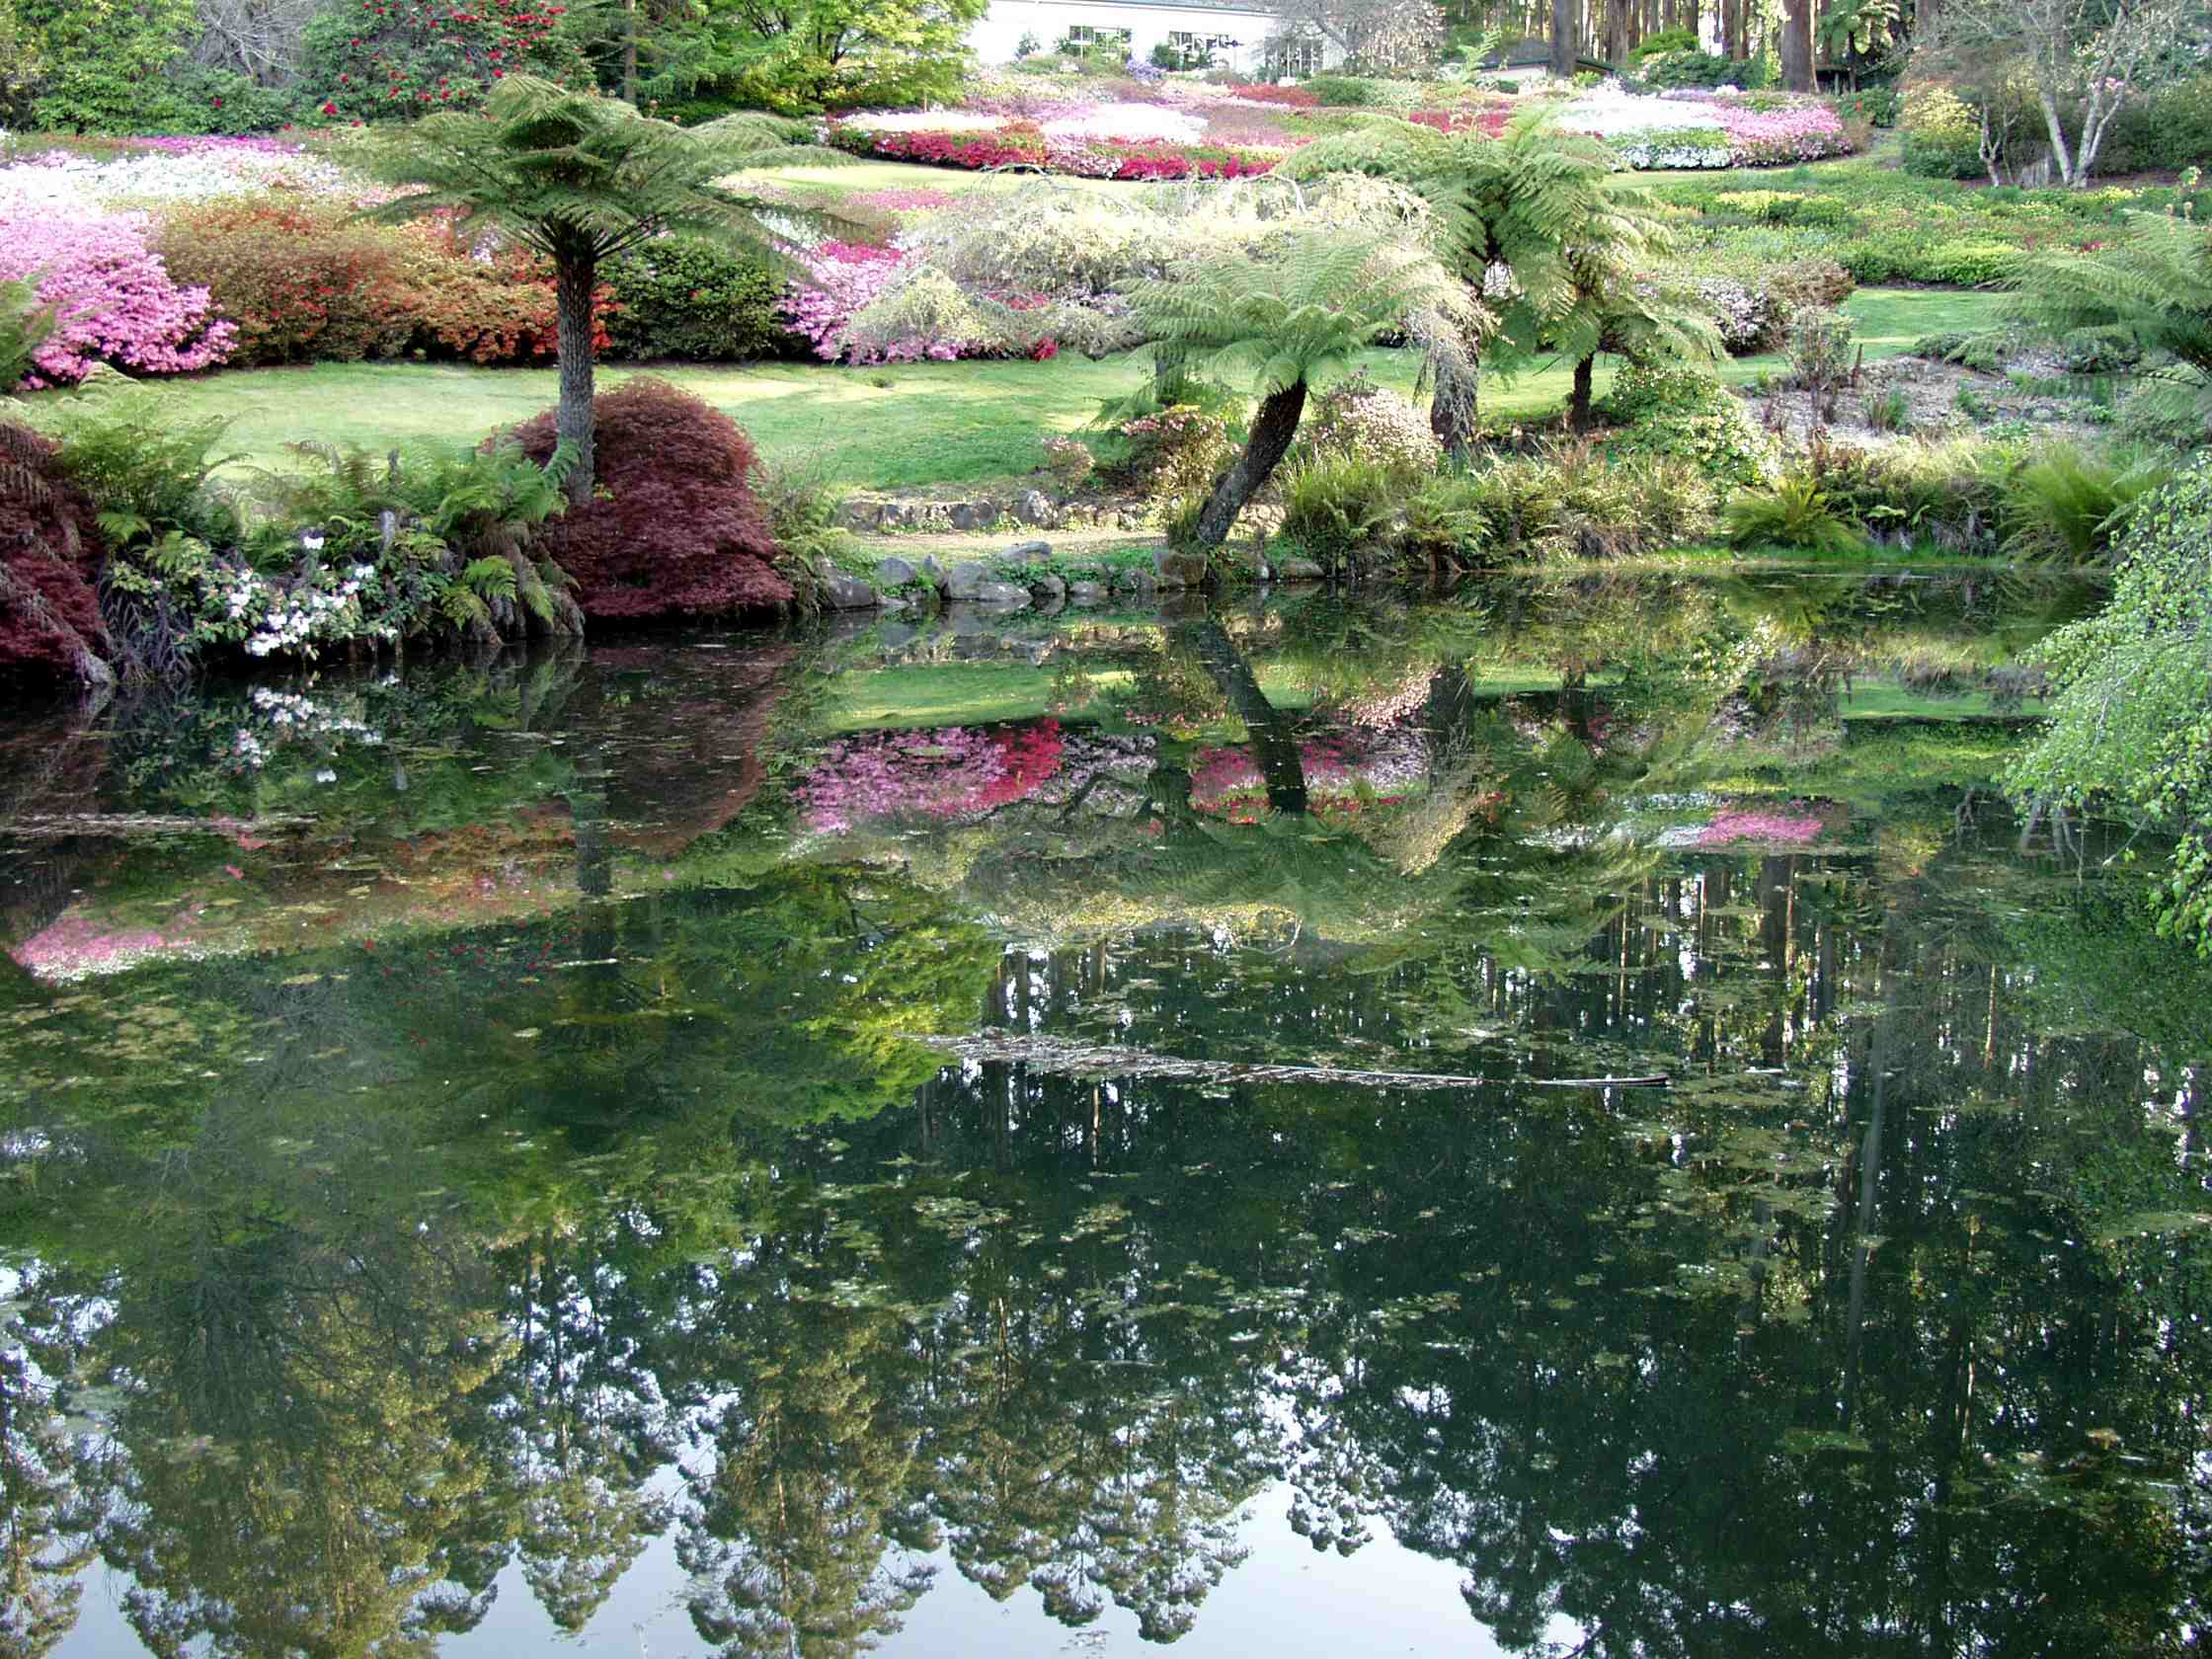 A Dreaming Place, Rhododendron Gardens